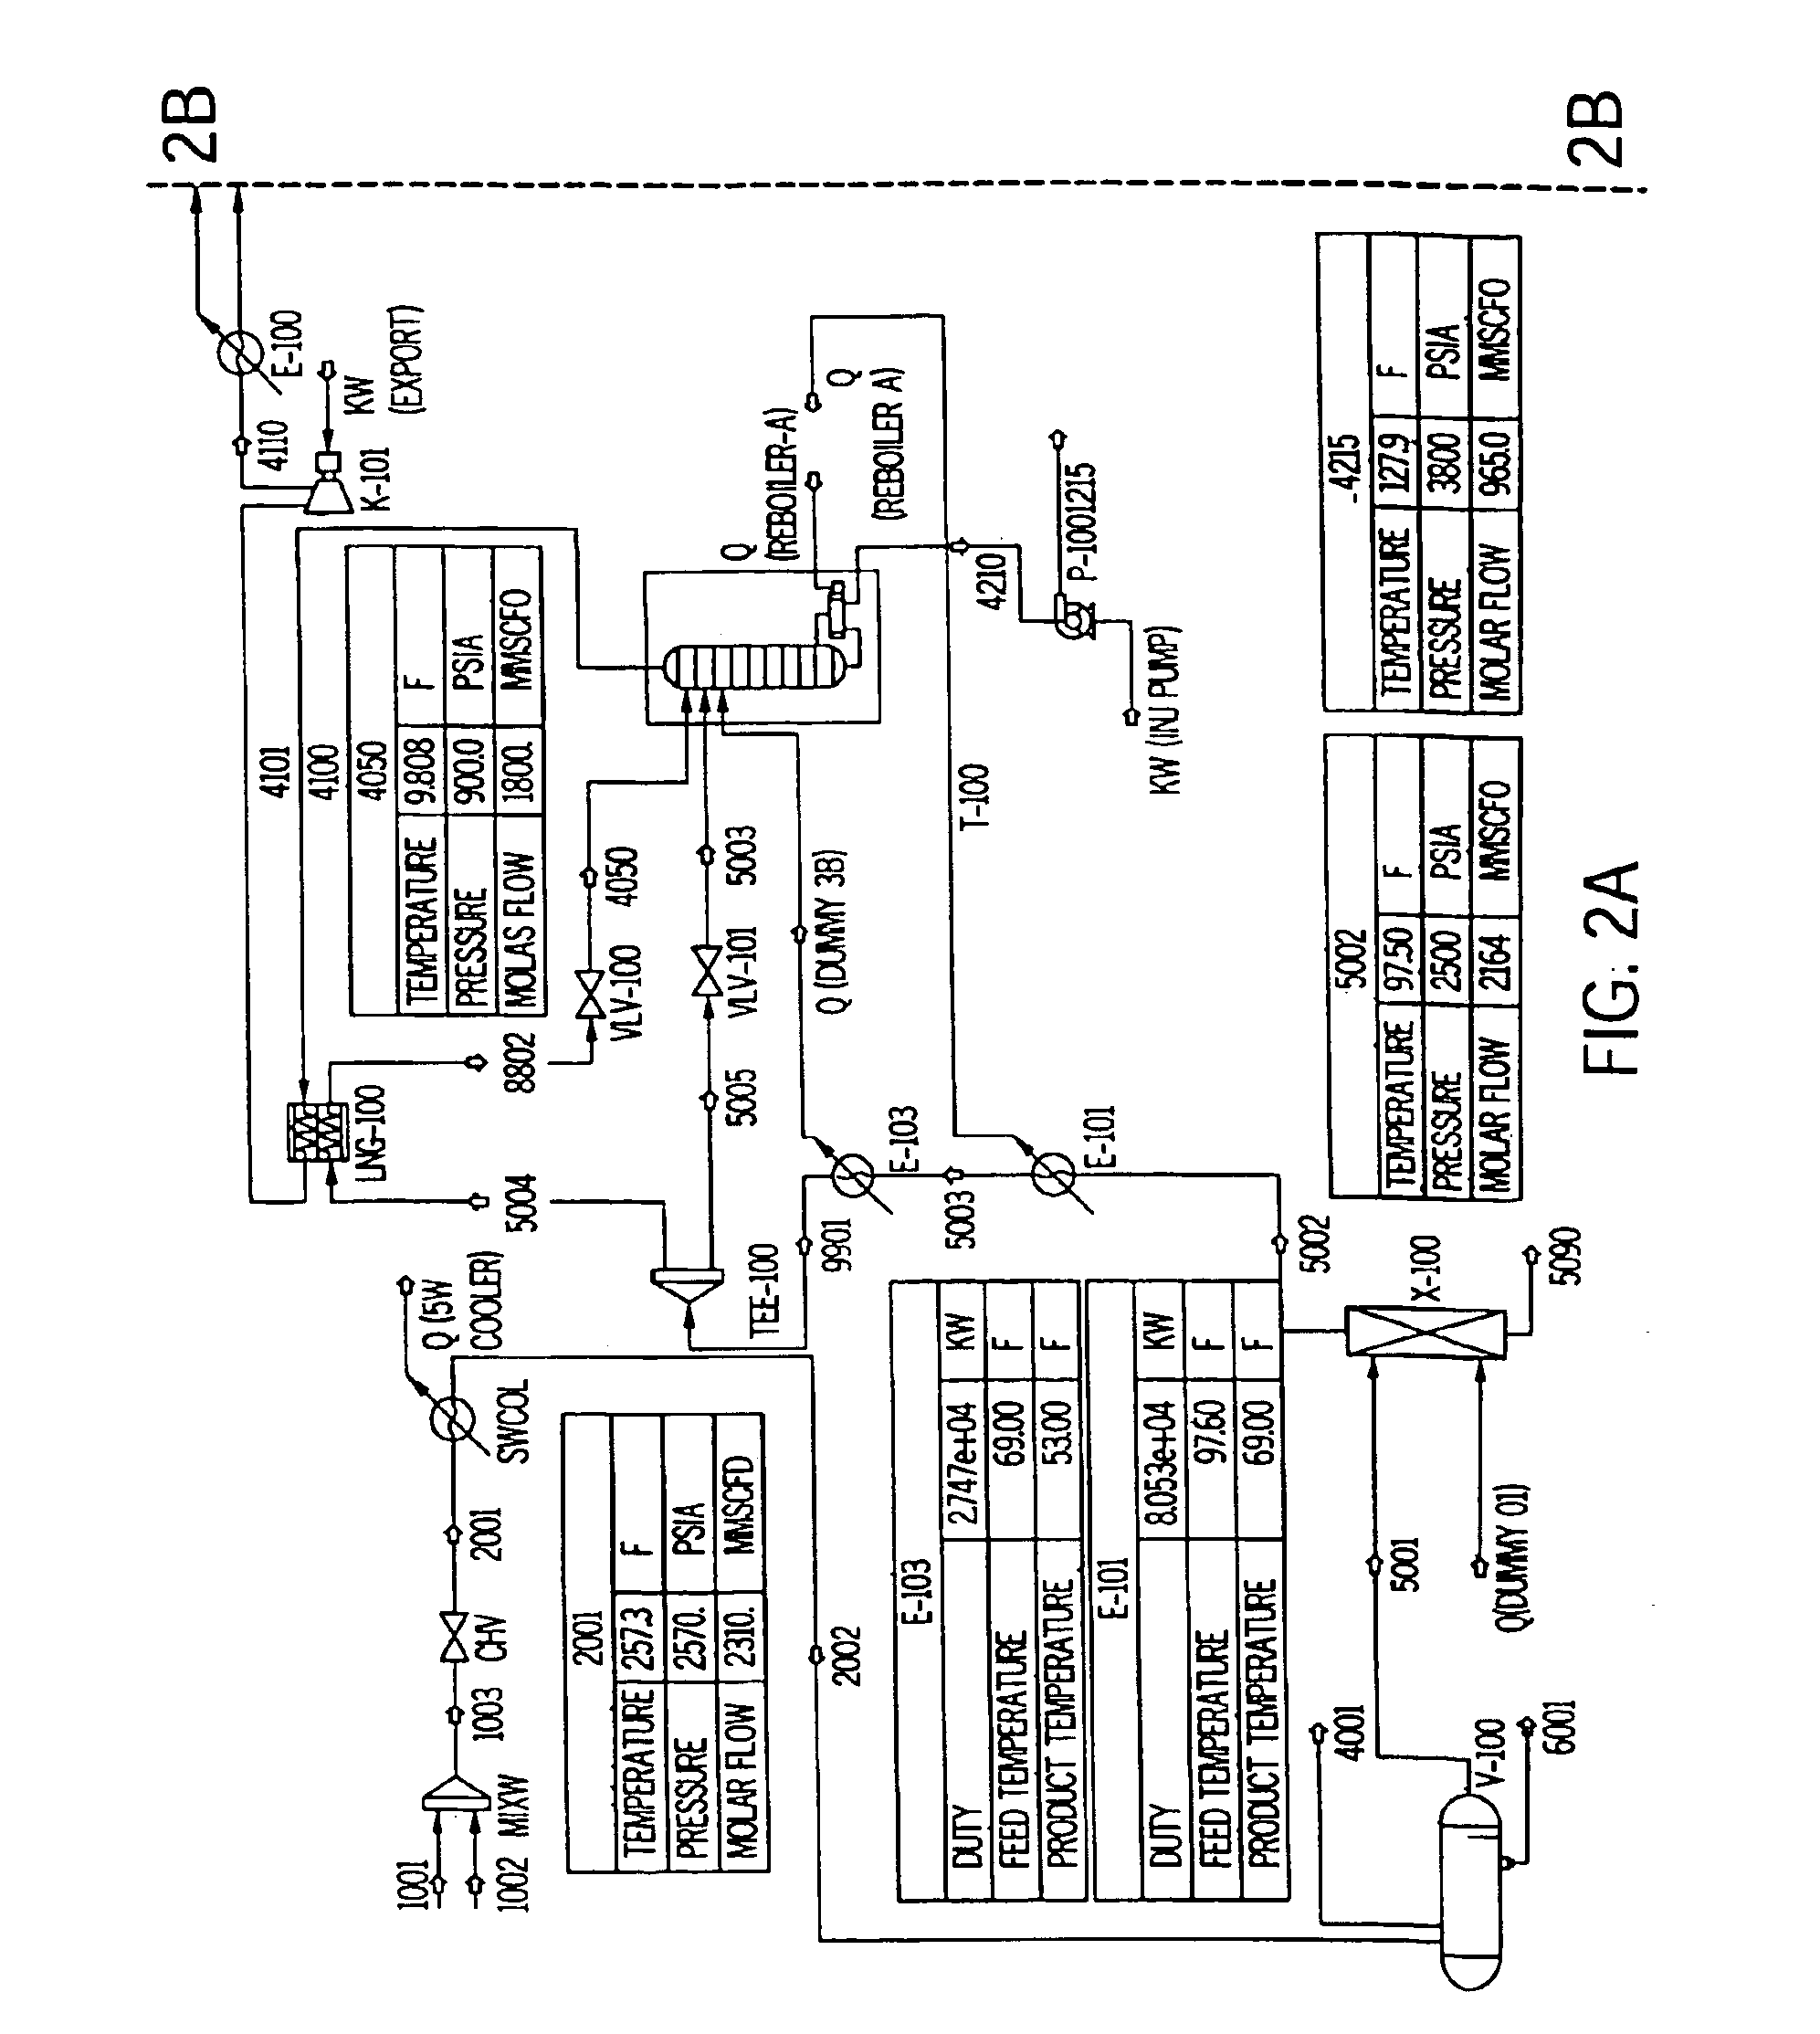 Method for utilizing gas reserves with low methane concentrations and high inert gas concentrations for fueling gas turbines